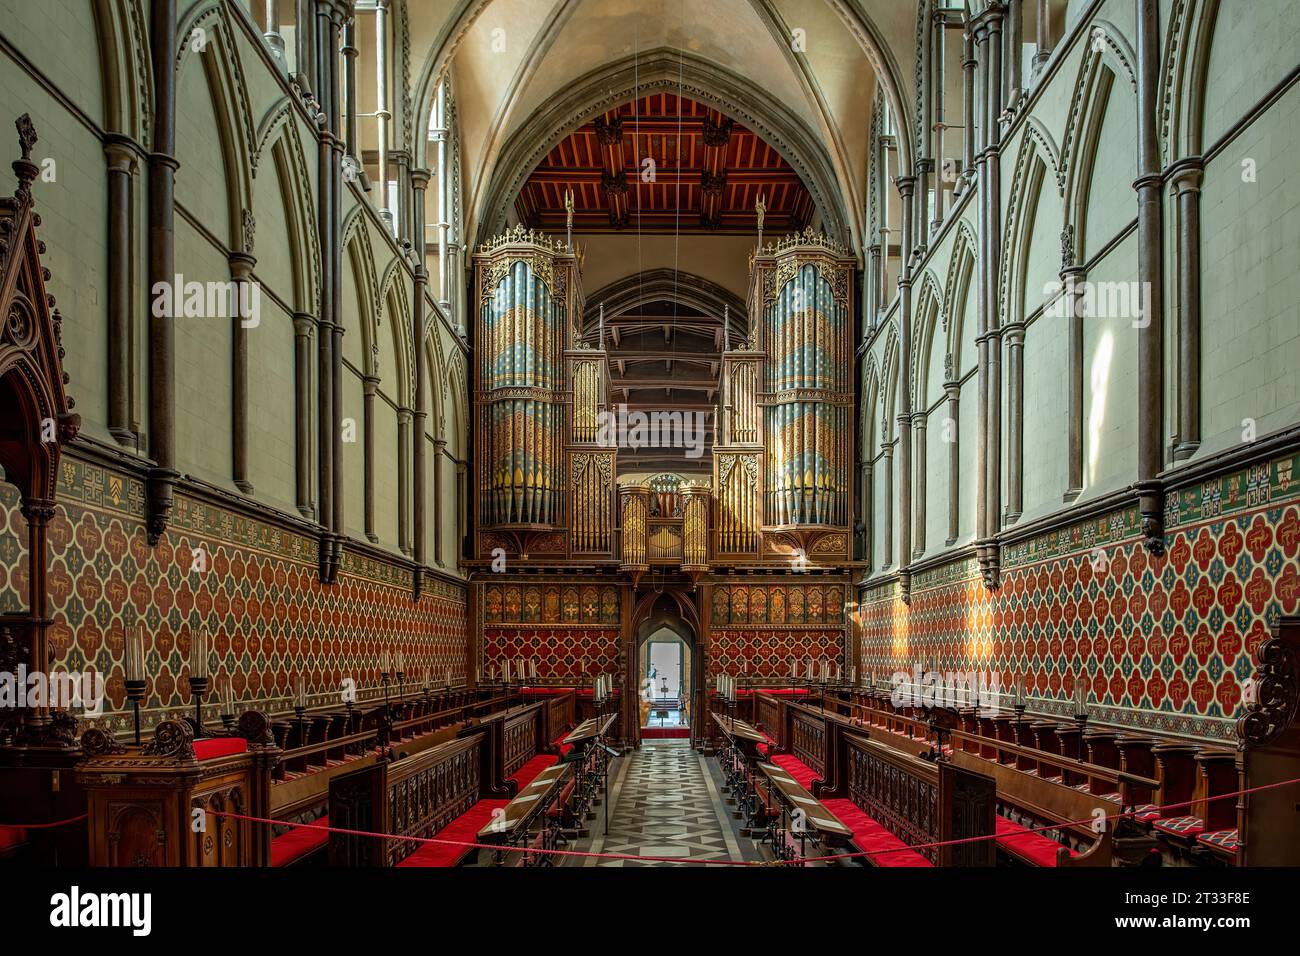 The Organ, Rochester Cathedral, Rochester, Kent, Angleterre Banque D'Images